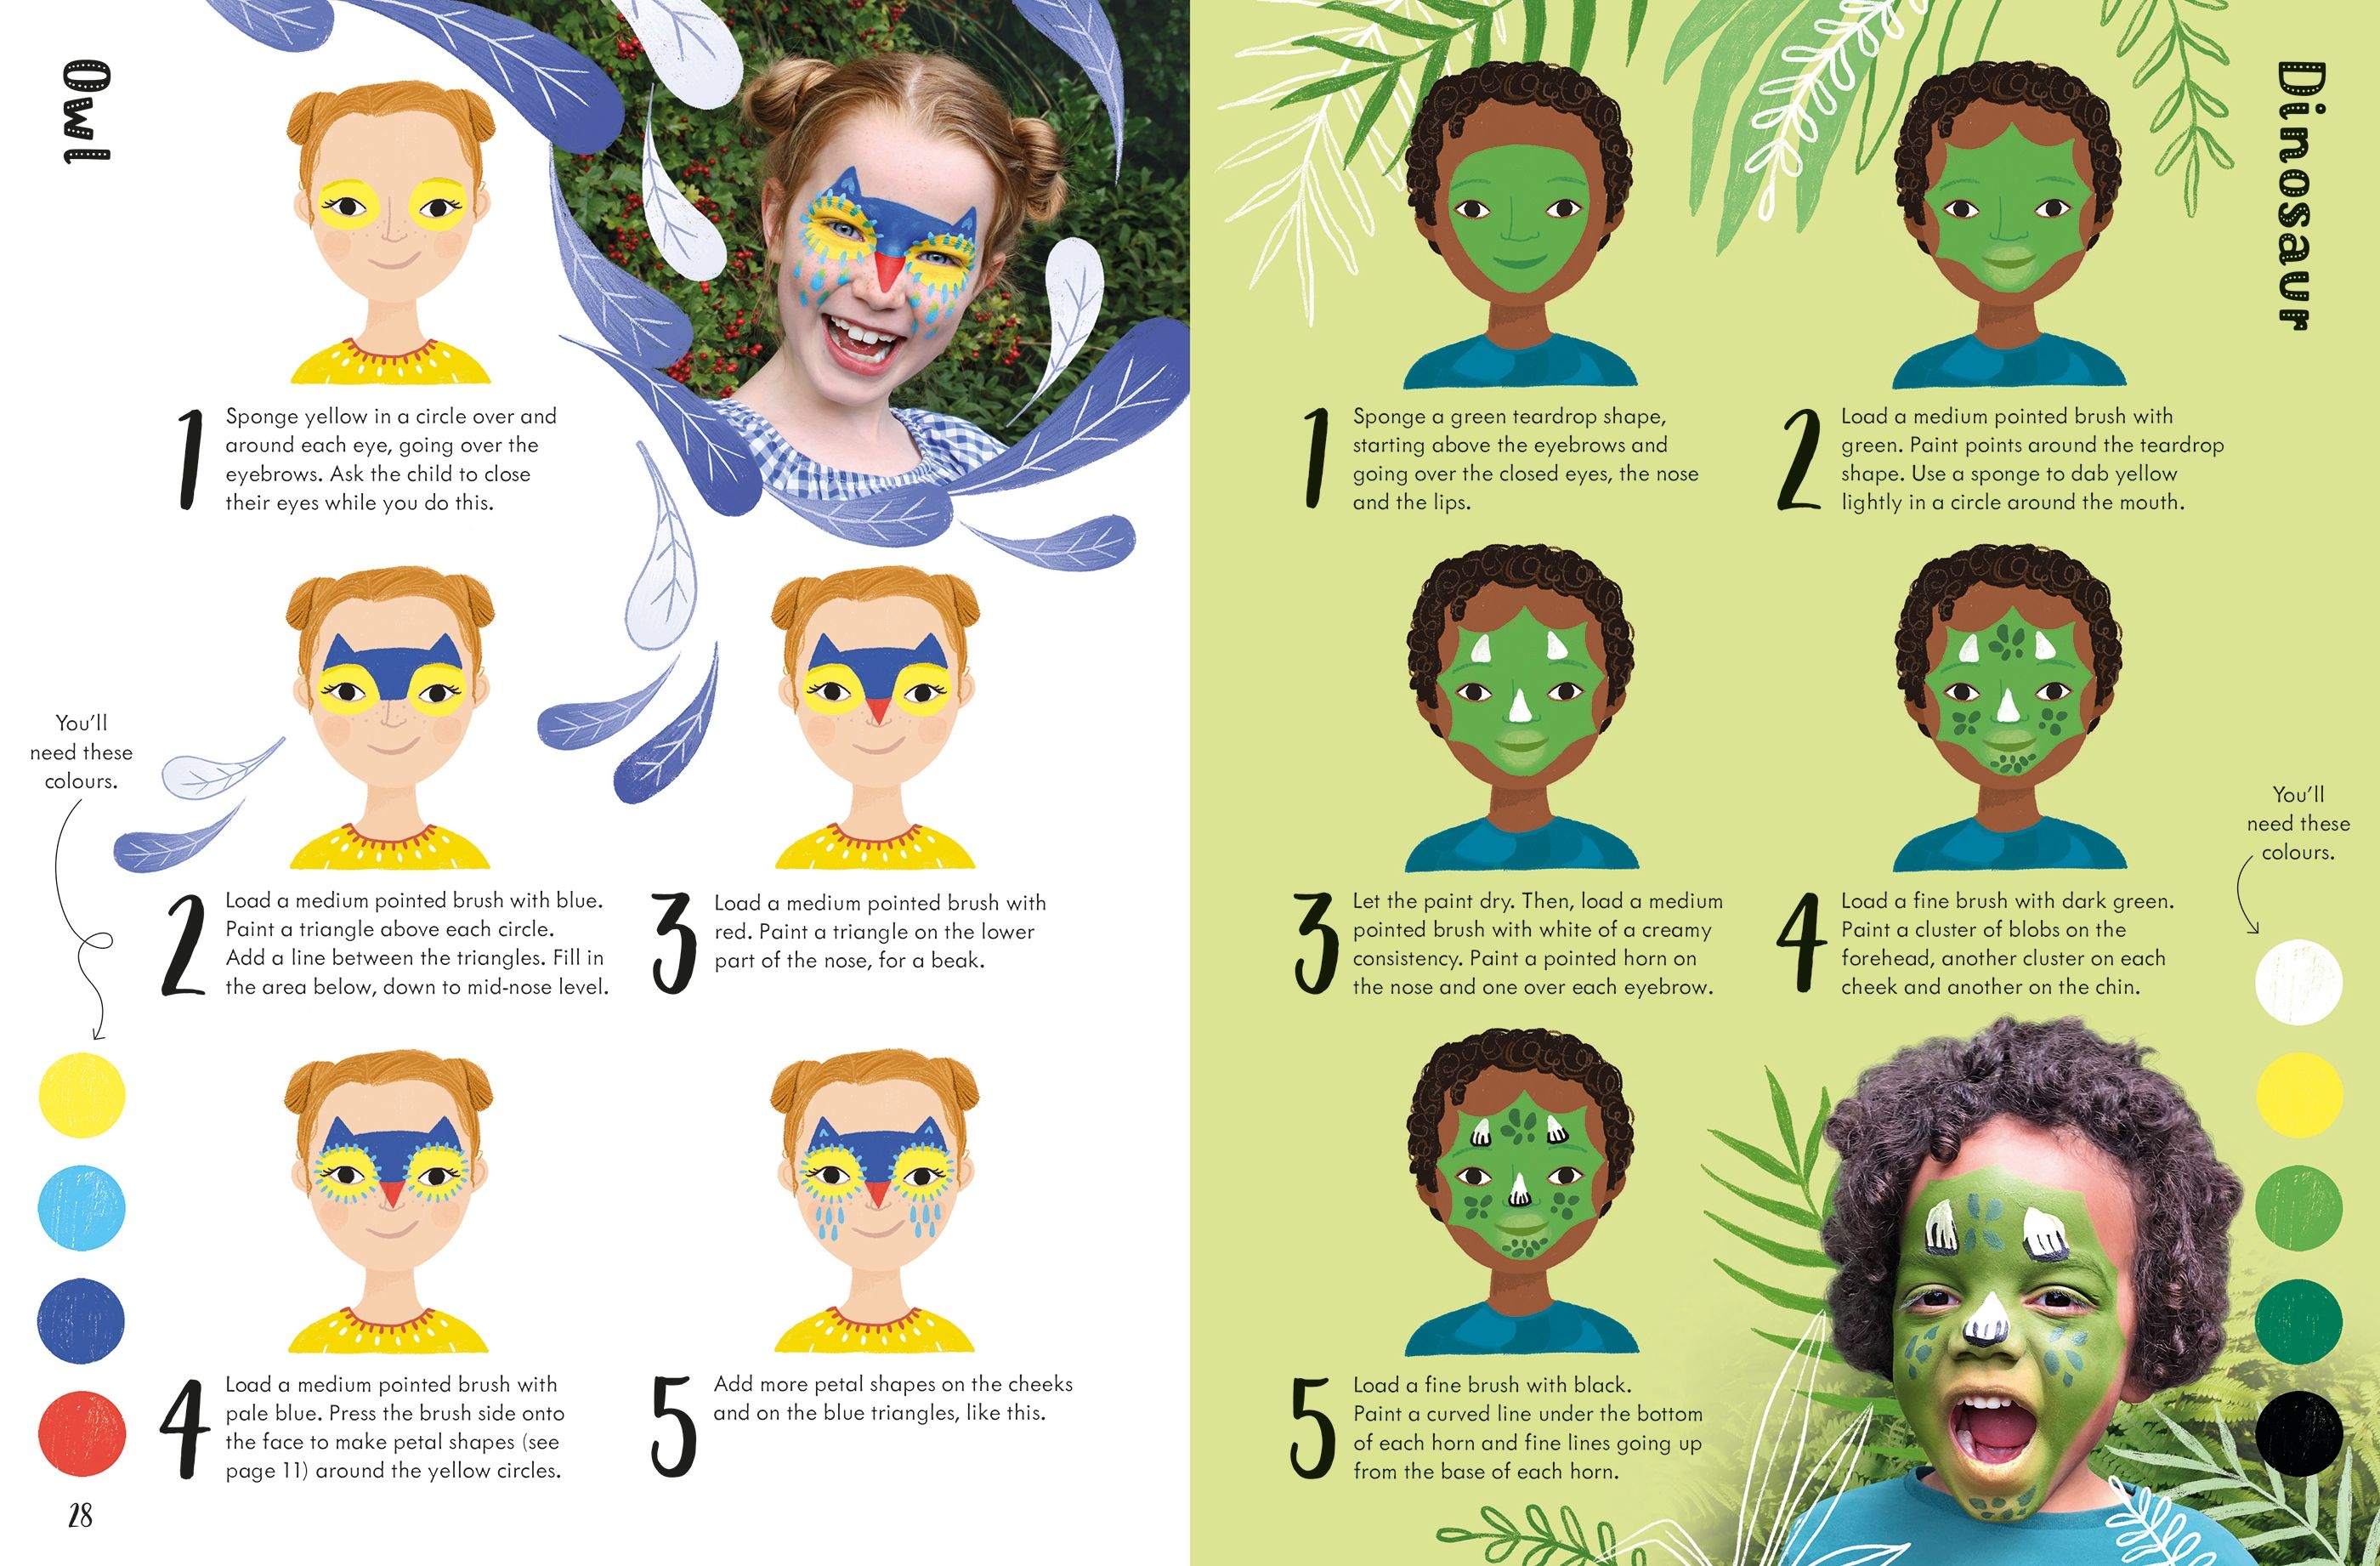 The Usborne Book of Face Painting